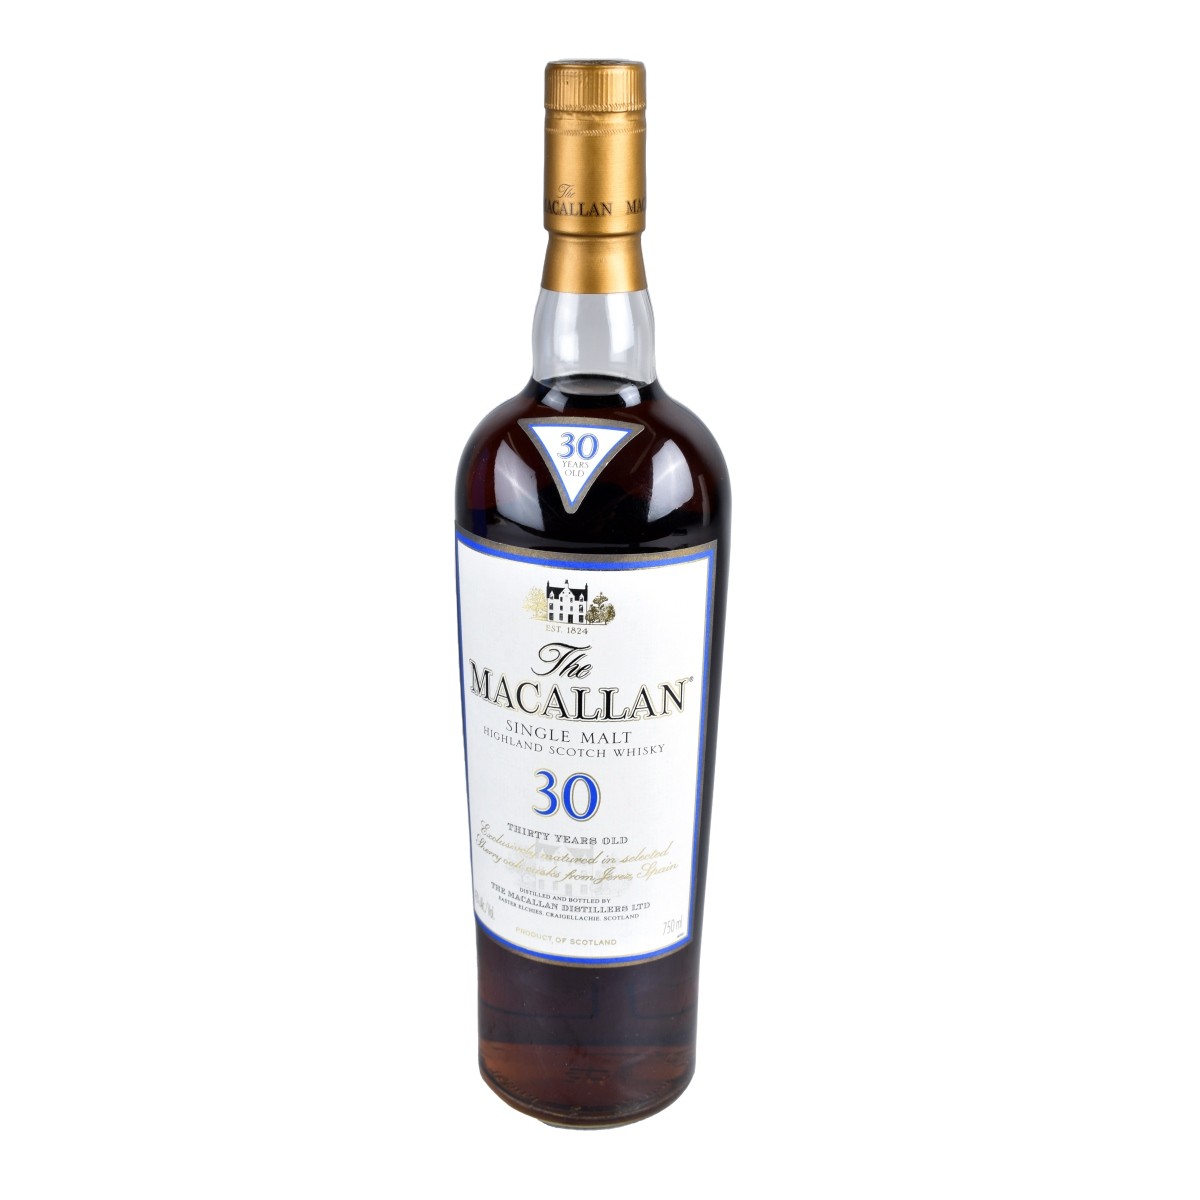 Macallan 30 Years Old Scotch Whisky